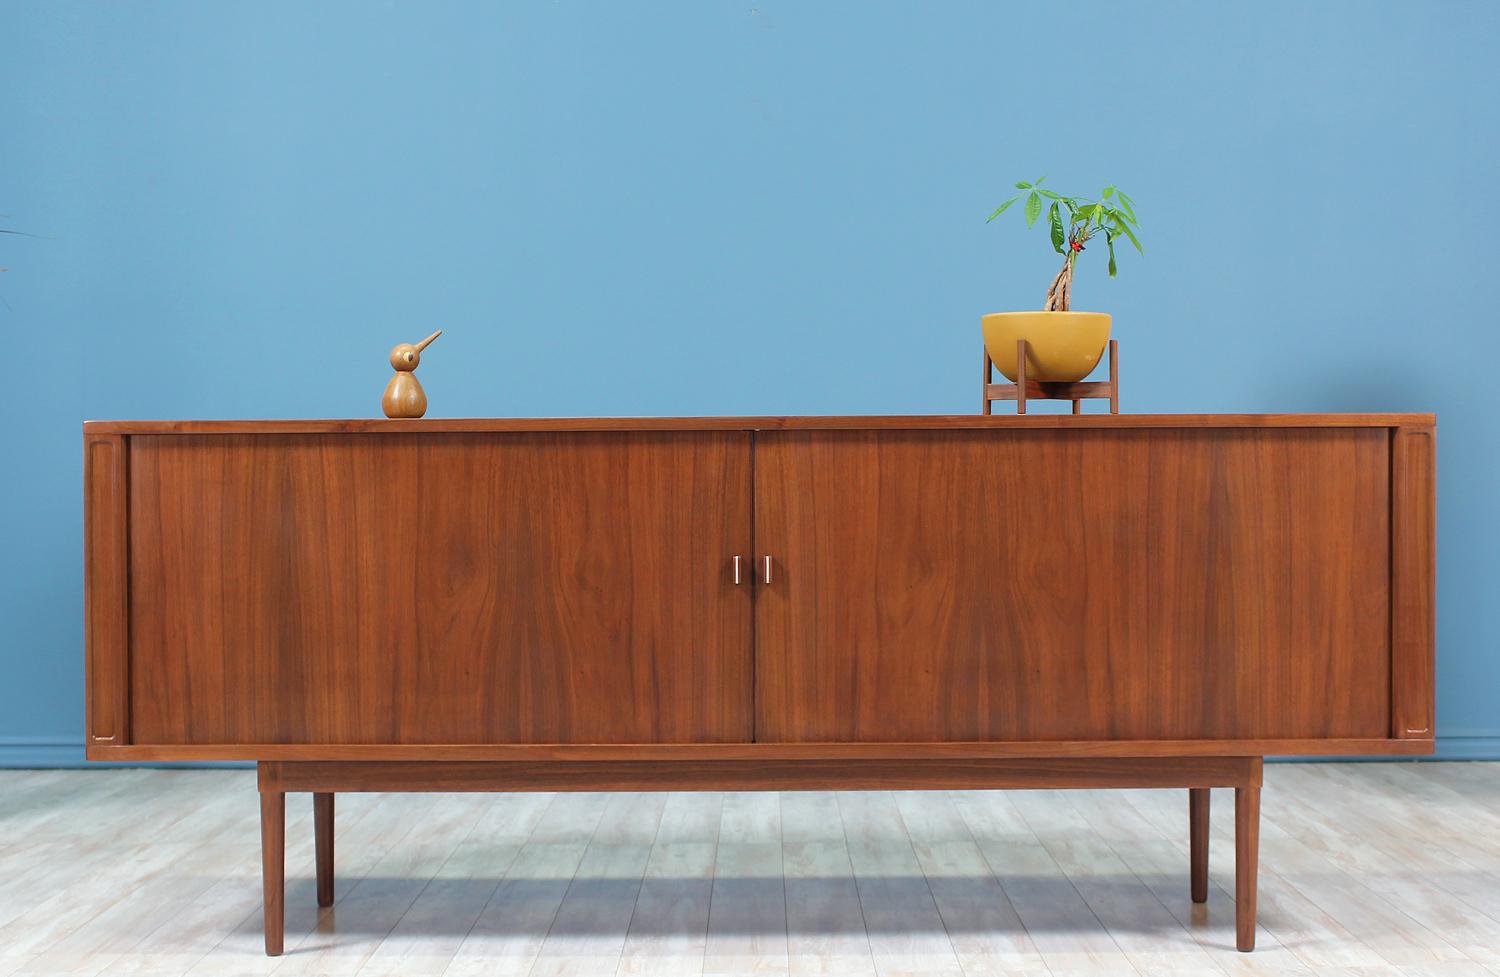 Elegant credenza designed and manufactured by Peter Løvig Nielsen in Denmark, circa 1970s. Featuring a walnut wood construction with seamless tambour doors adorned with subtle aluminum-accented pulls. The doors open smoothly to reveal ample storage